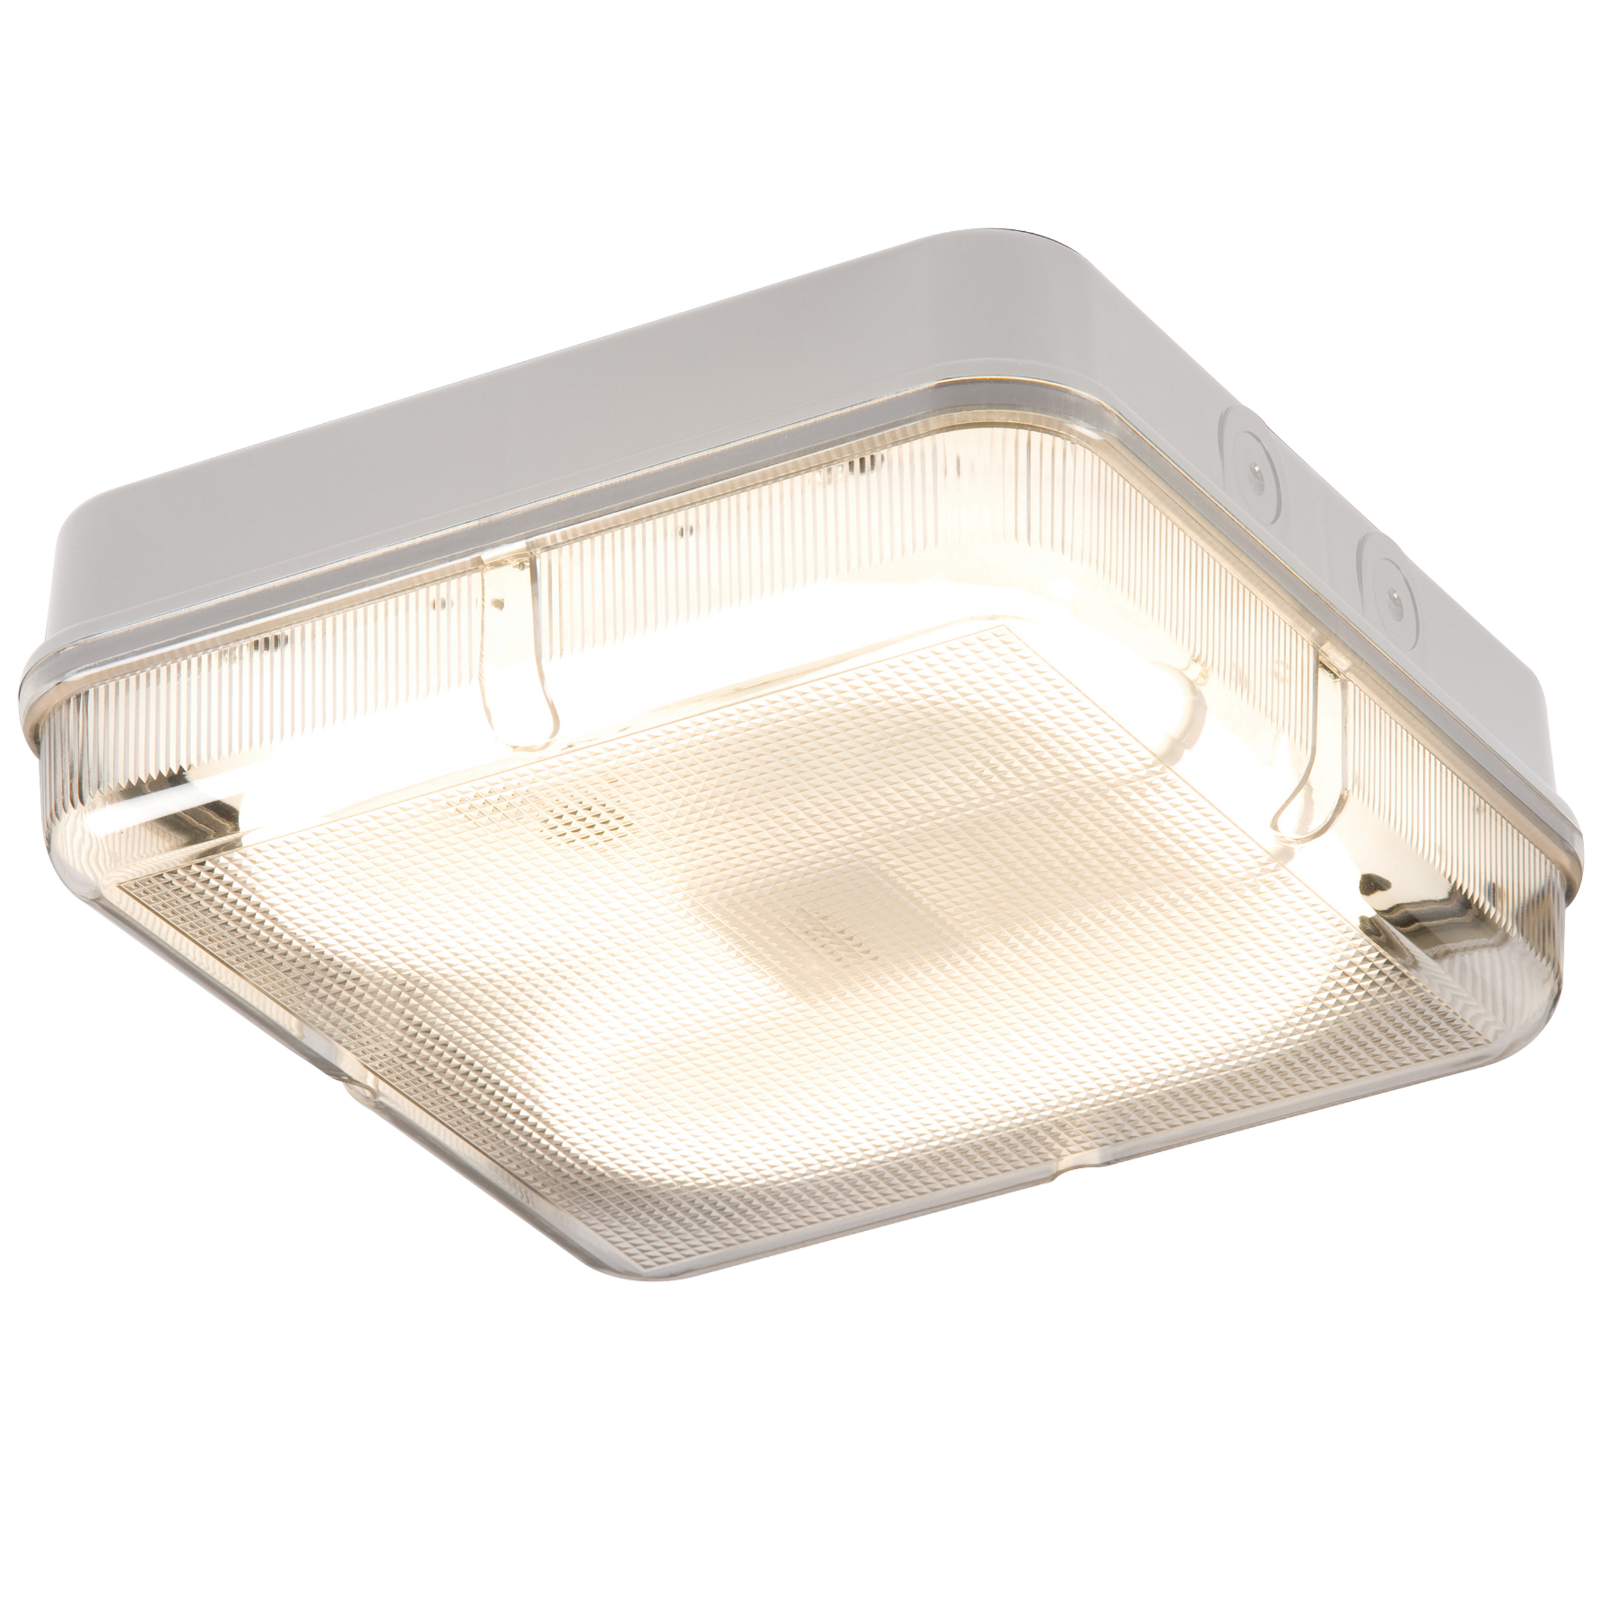 IP65 28W HF Square Bulkhead With Prismatic Diffuser And White Base - TPS28WPHF 